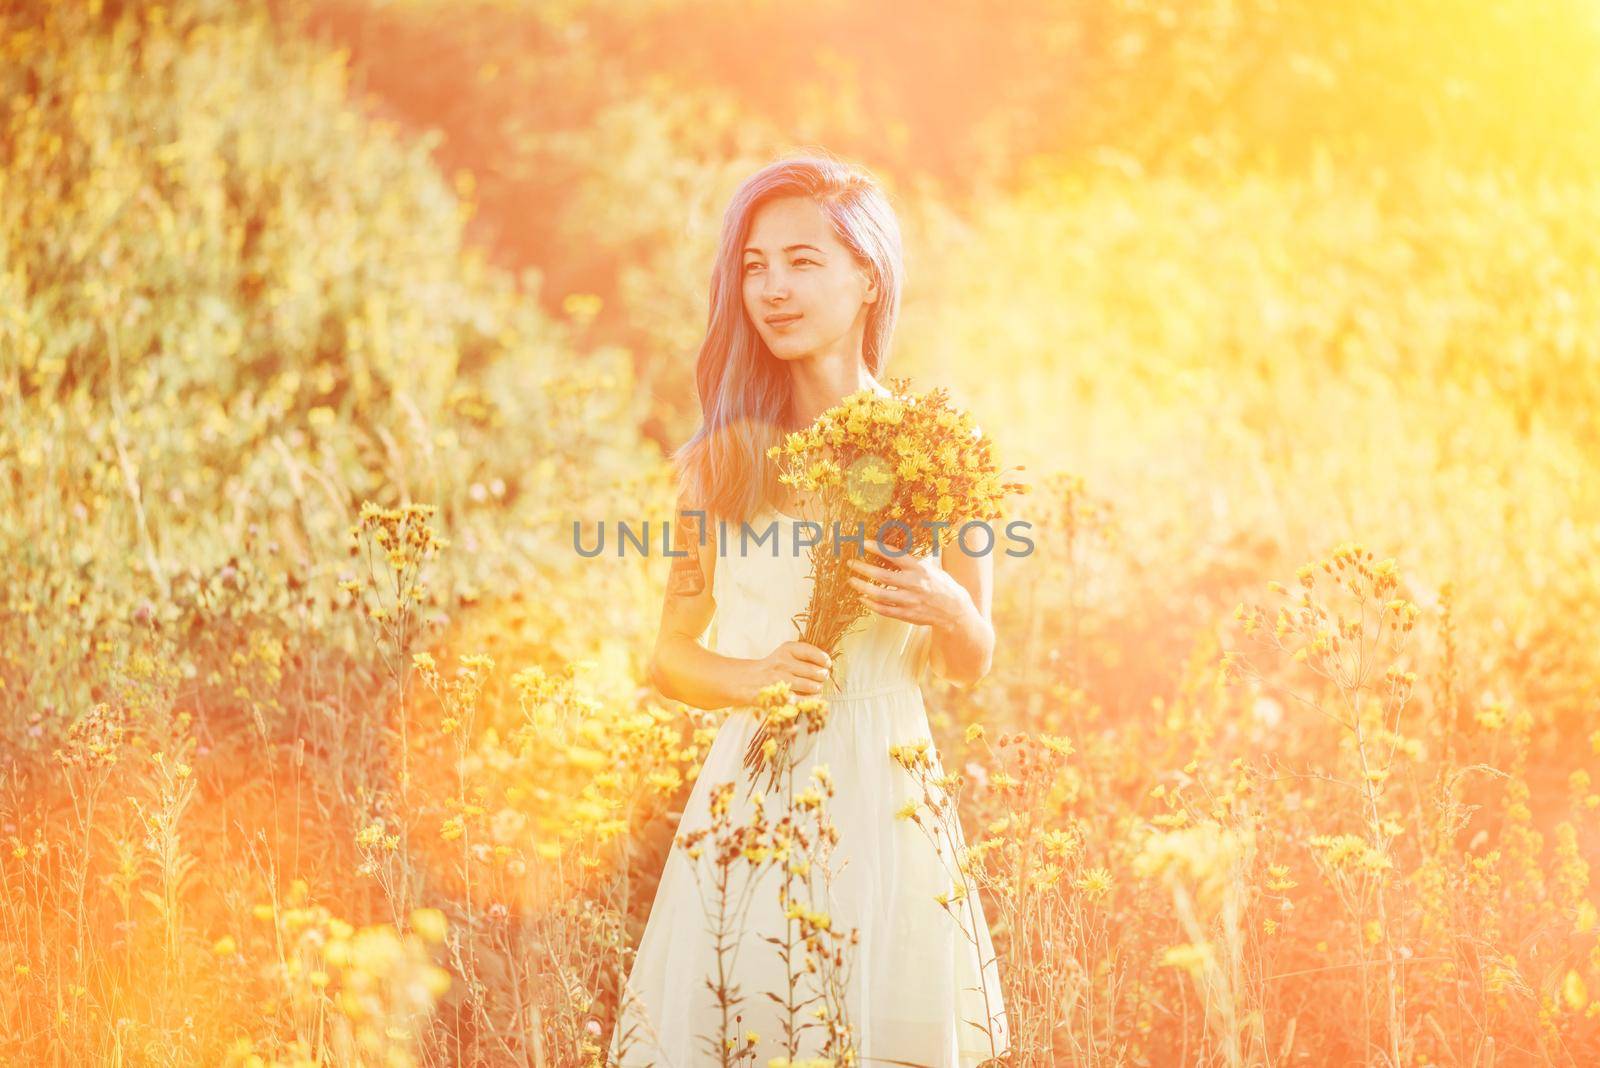 Beautiful young woman with blue hair and bouquet walking on flower field in summer. Image with sunlight effect